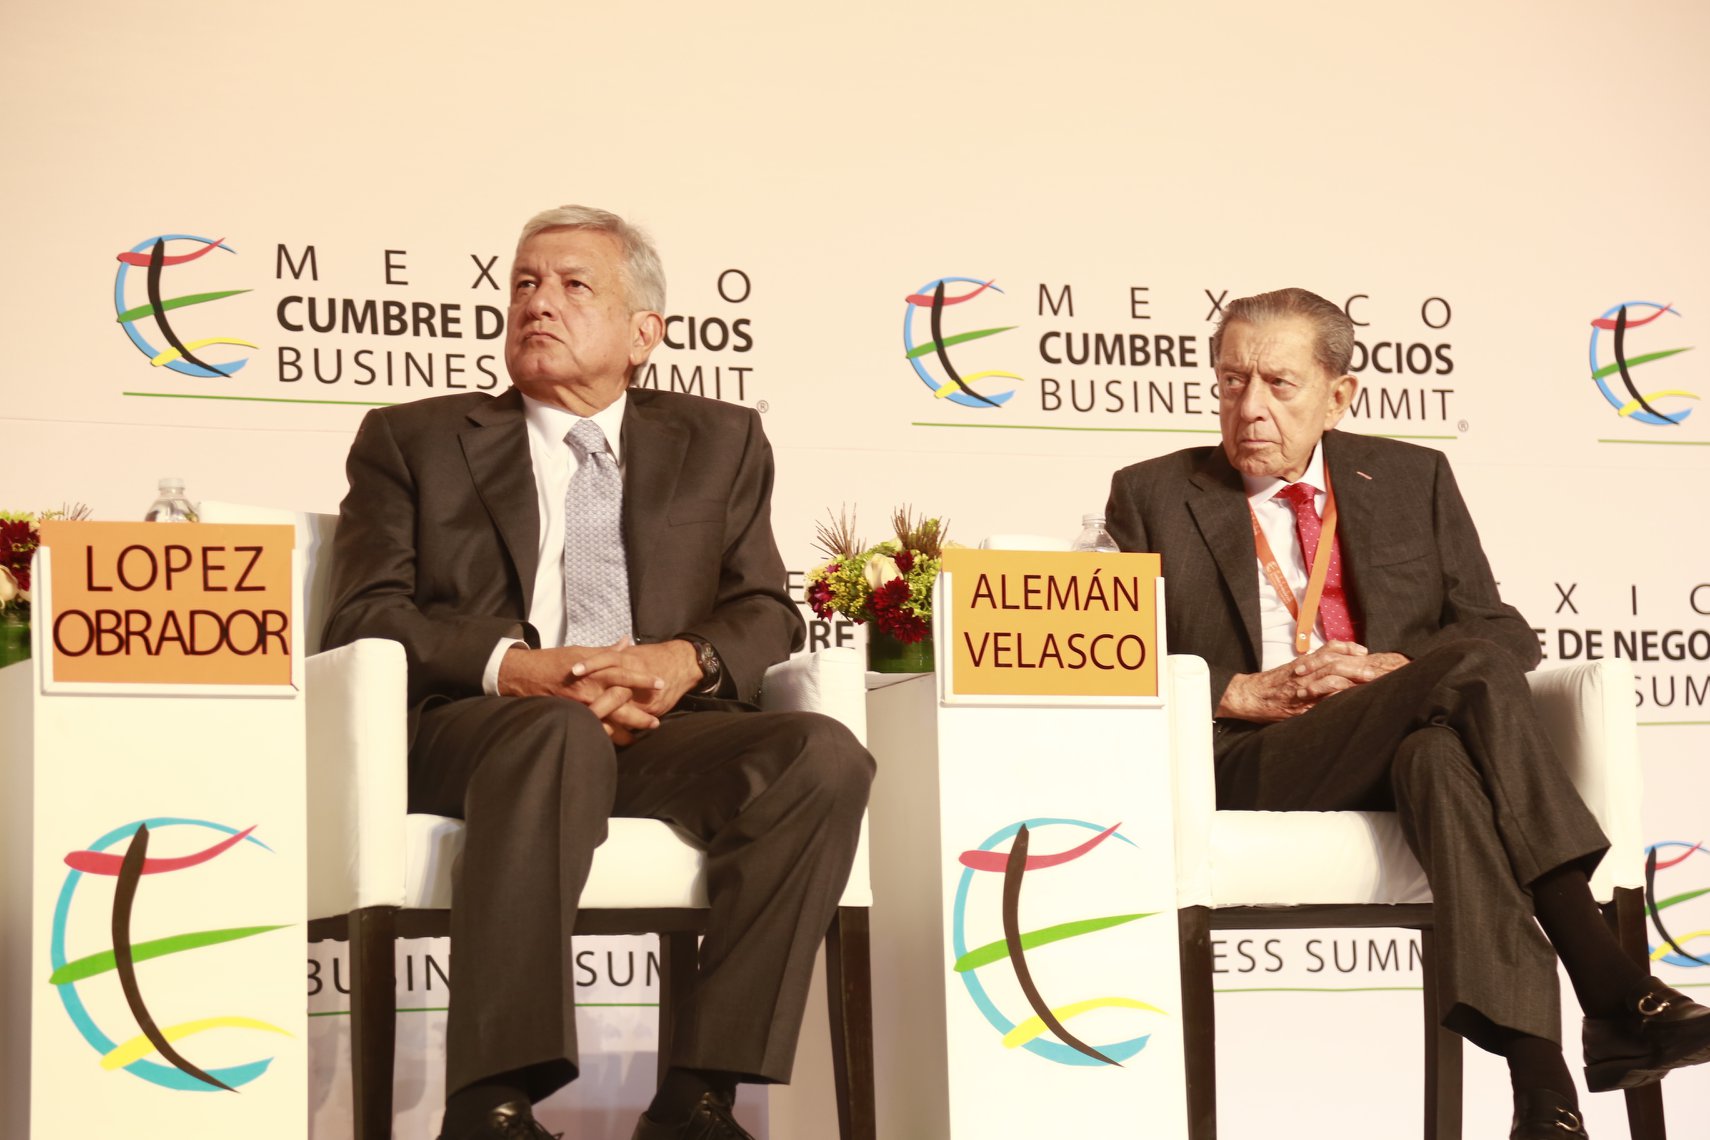 Andres Manuel Lopez Obrador and MIguelAleman Velasco at the Mexico Business Summit